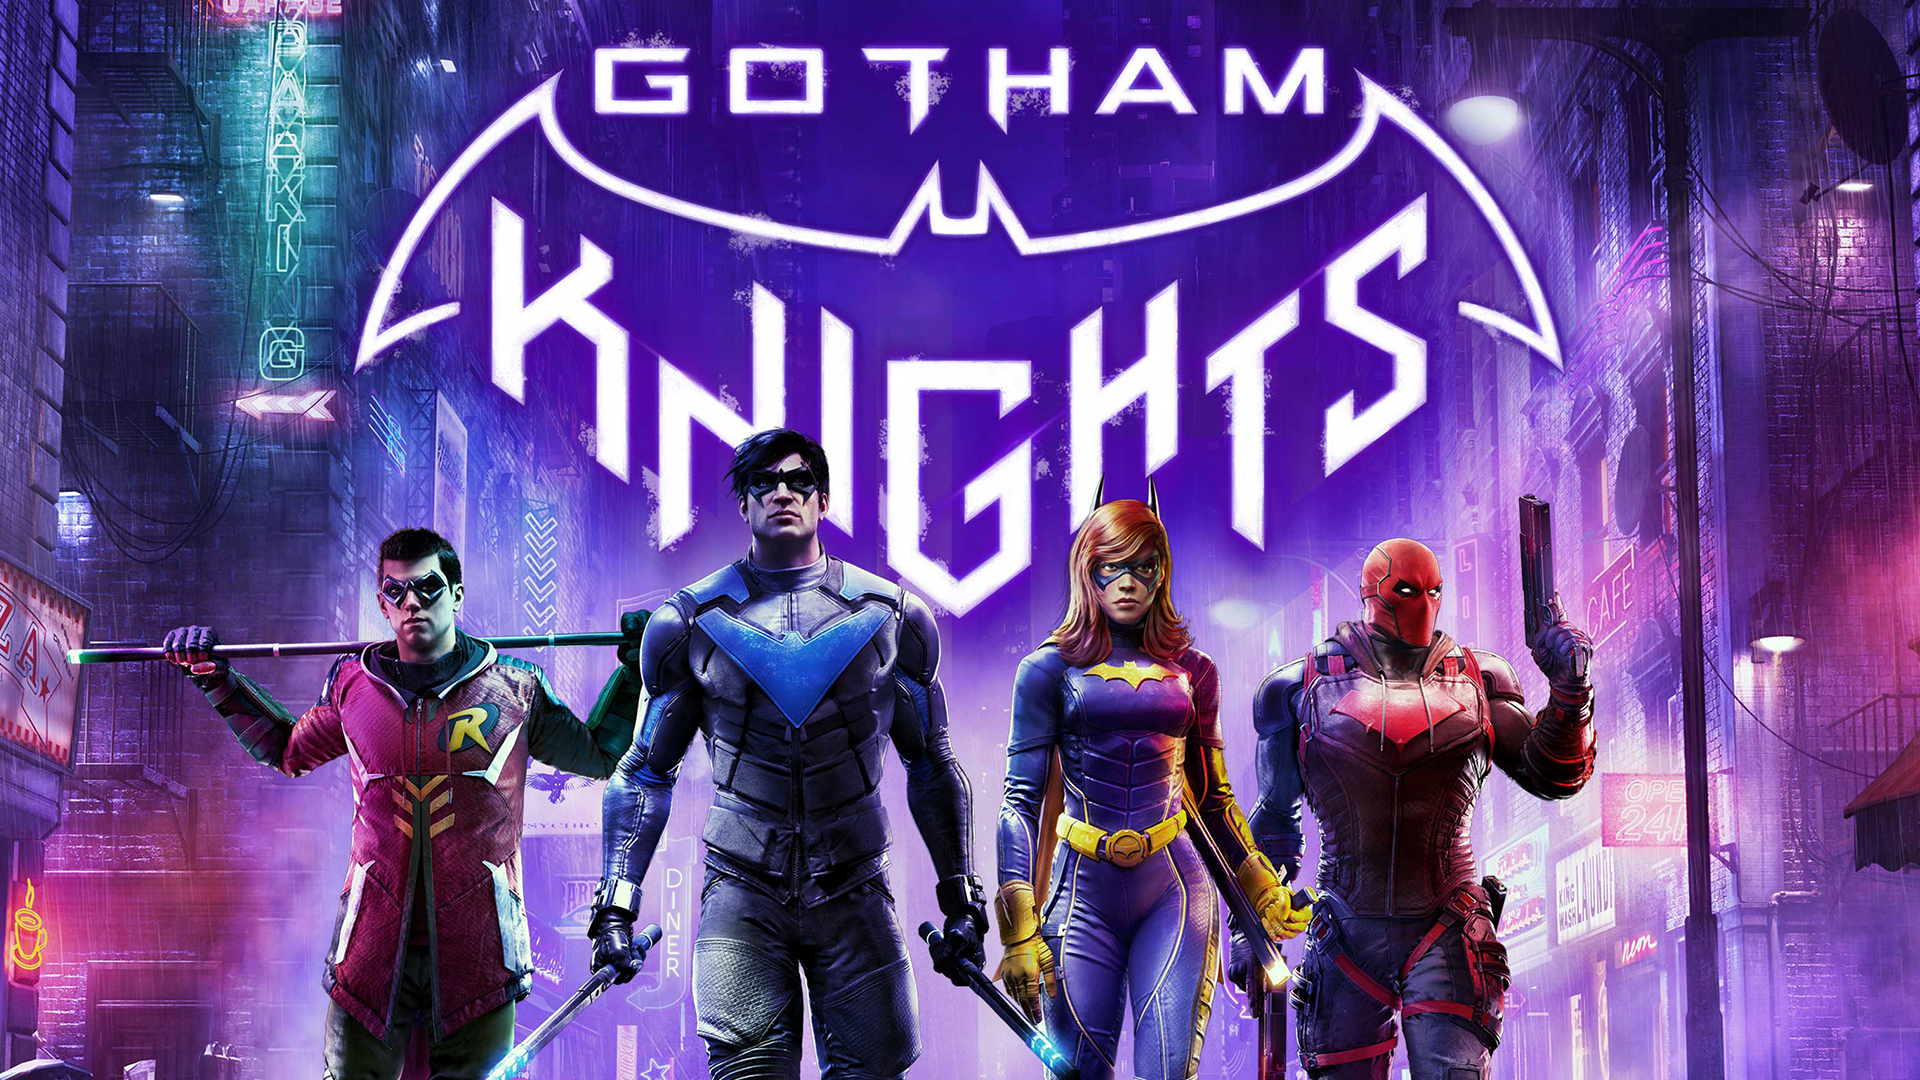 When Can I Play Gotham Knights?